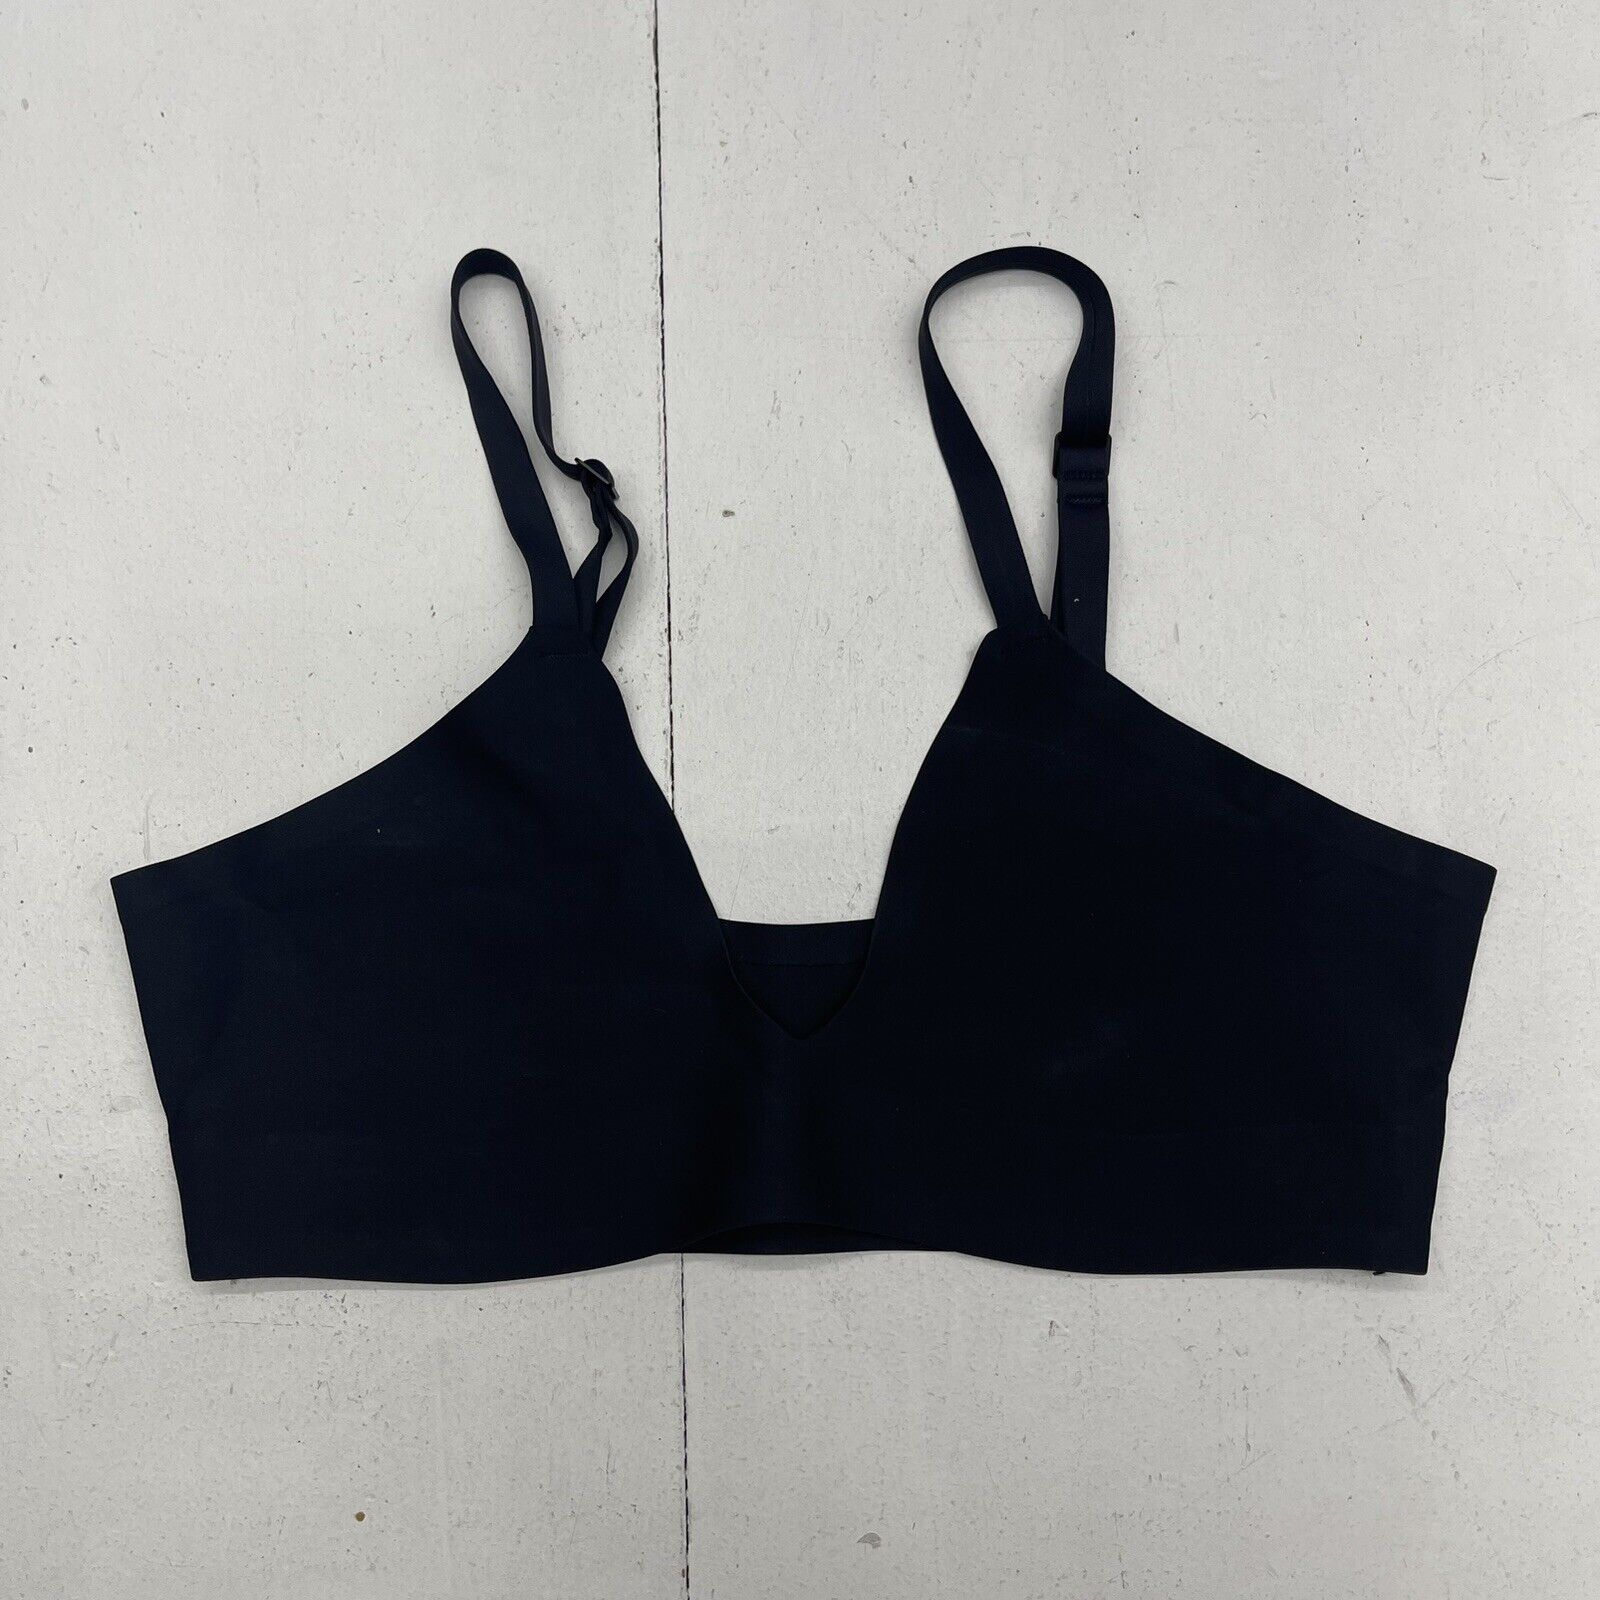 Parade Smooth Lift Triangle Bralette